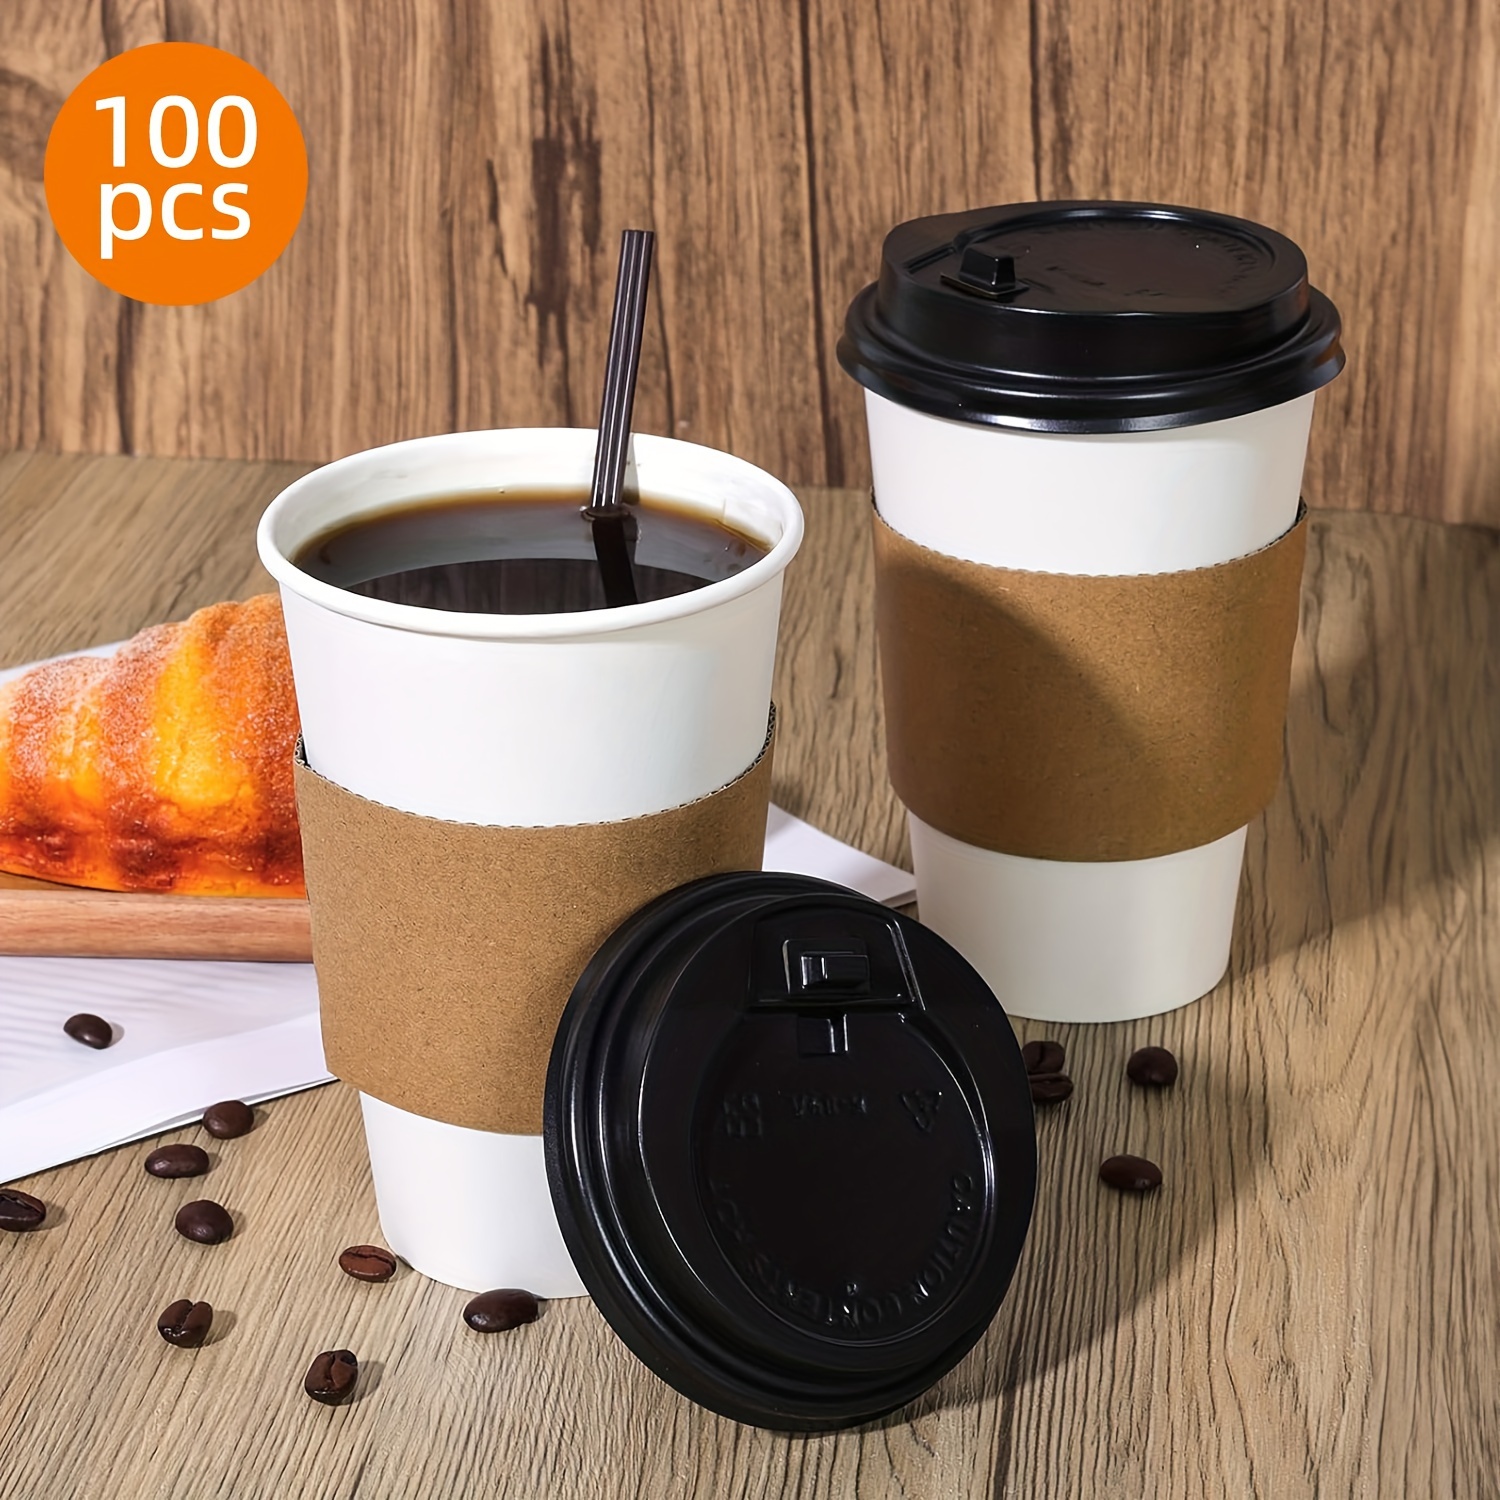 

100pcs Disposable Coffee Cups With Lids, Disposable Paper Cups, Sleeves And Stirrers, To Go Hot/cold Coffee Cups For Easy Sorting, Parties, Birthdays, And Gatherings When Going Out 16oz 13.2in